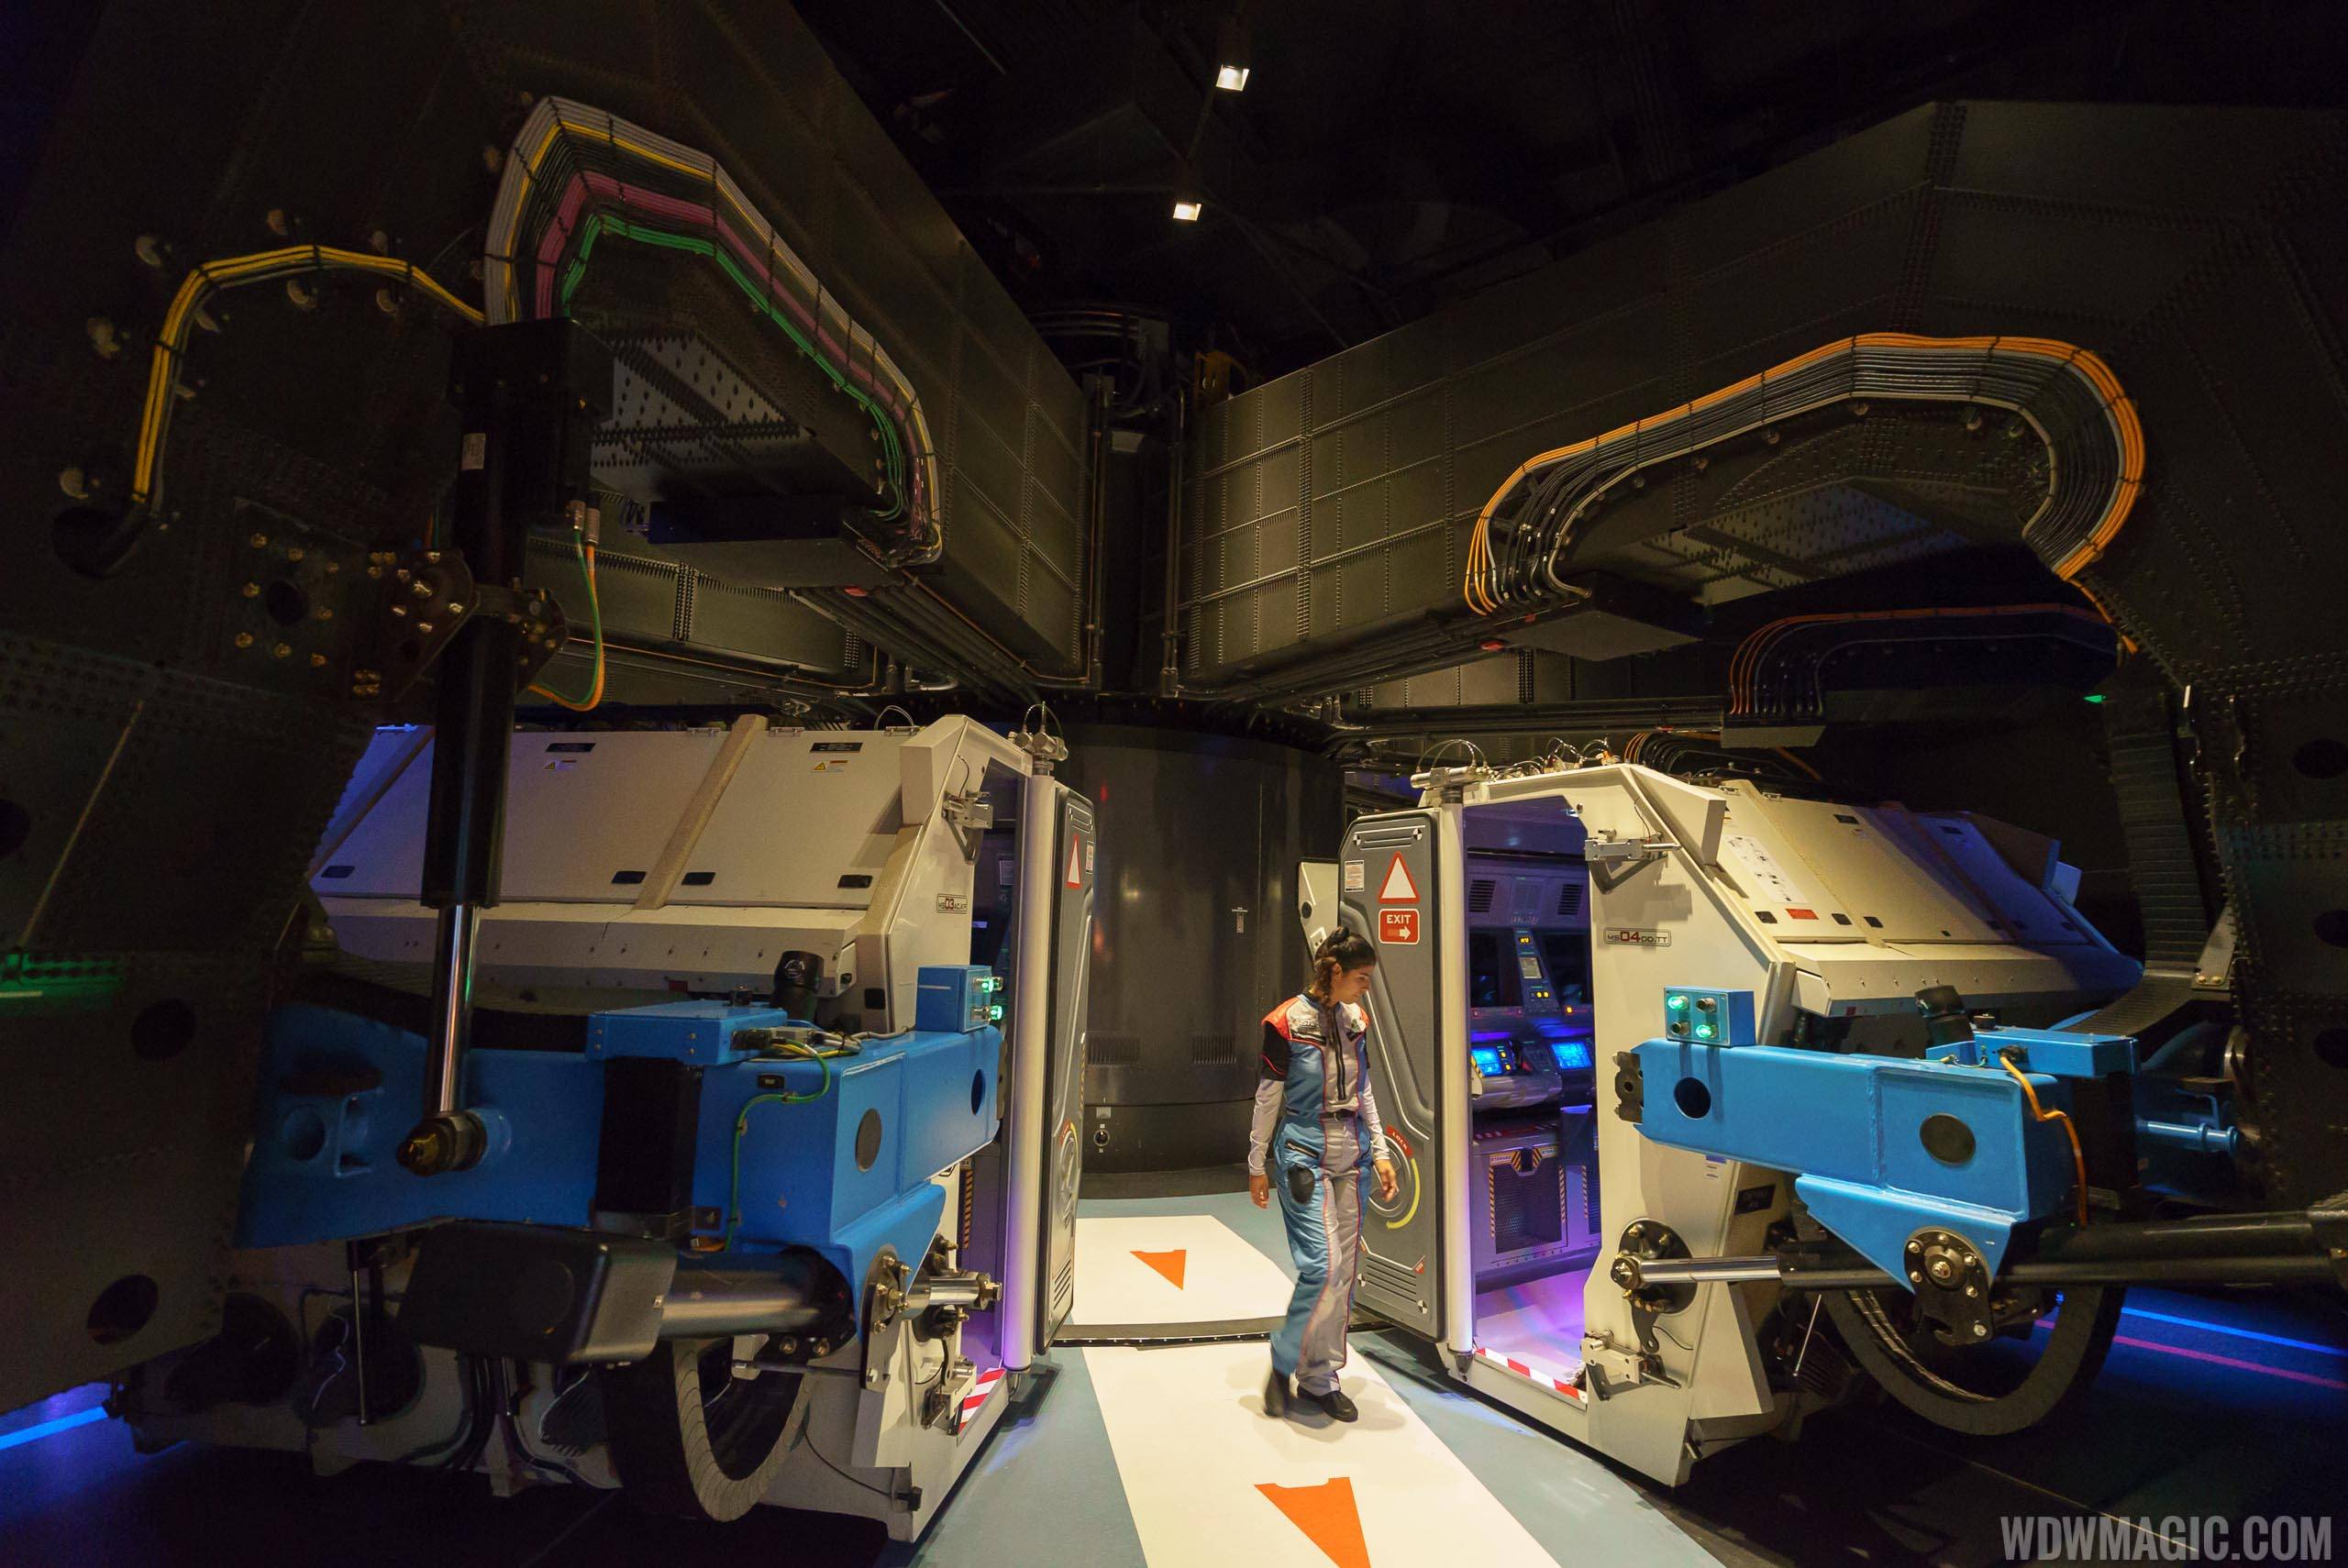 The Mission SPACE centrifuge ride system